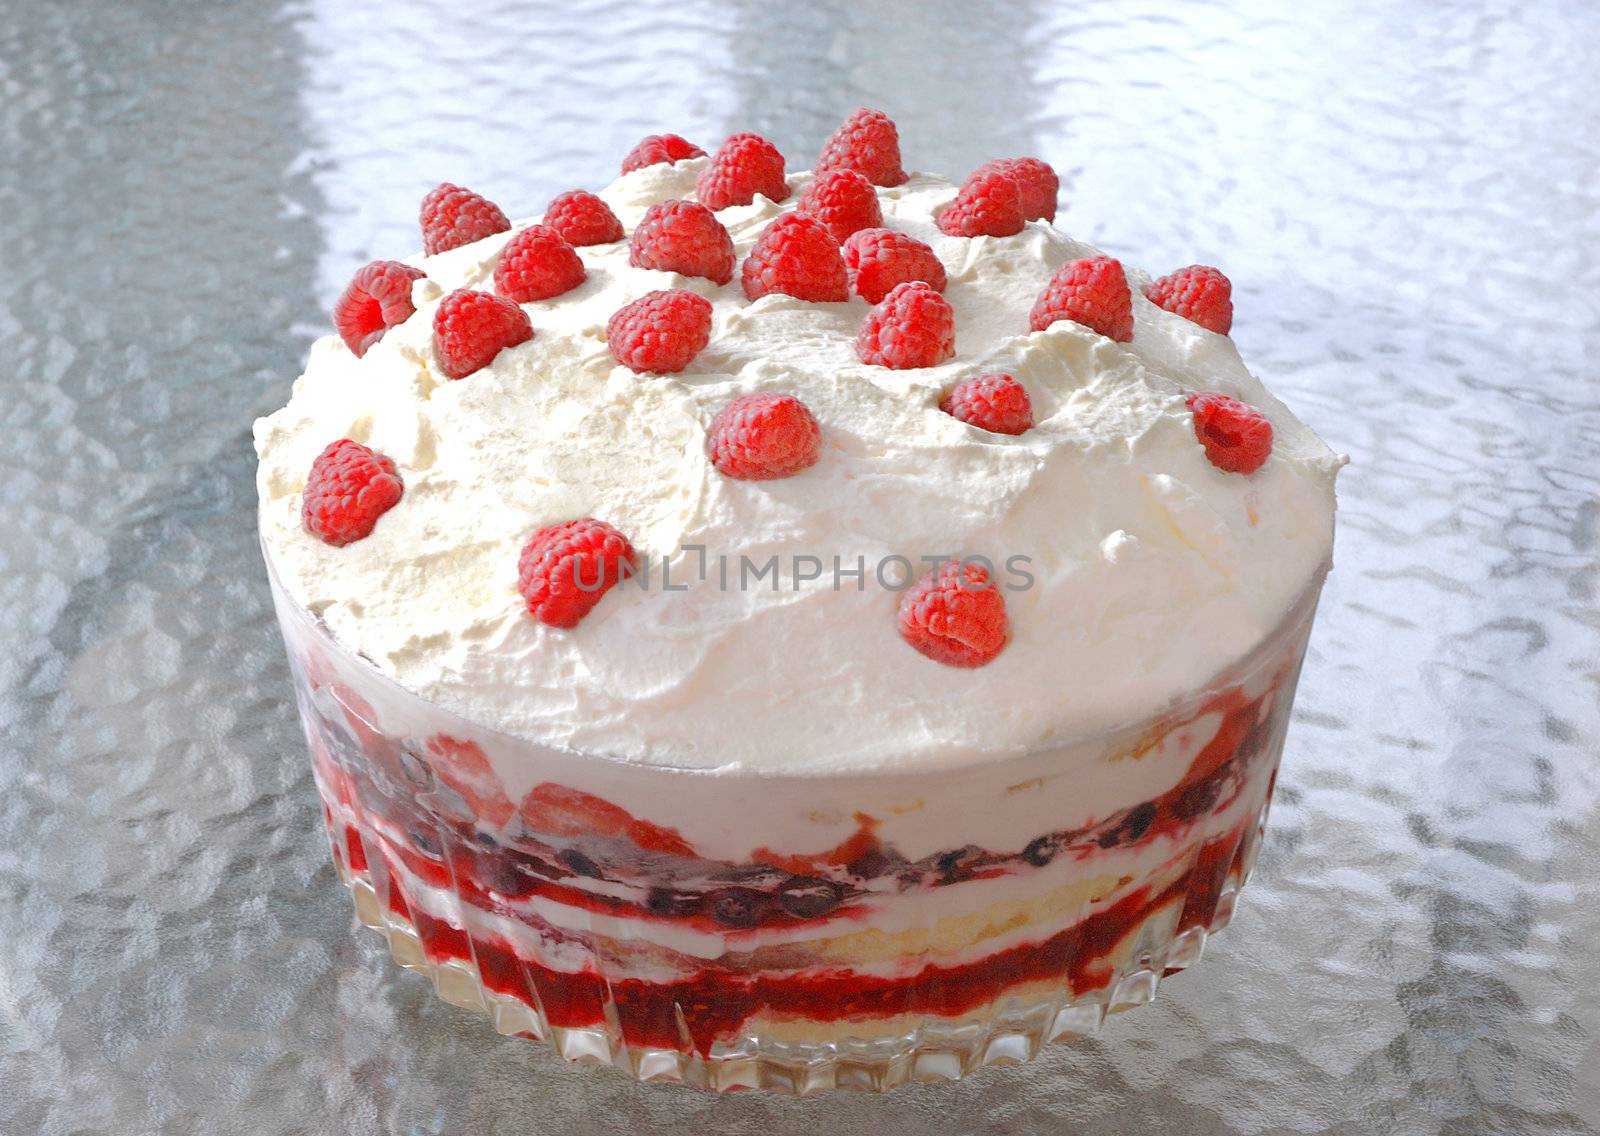 Raspberry Trifle with Fresh Raspberries by griffre